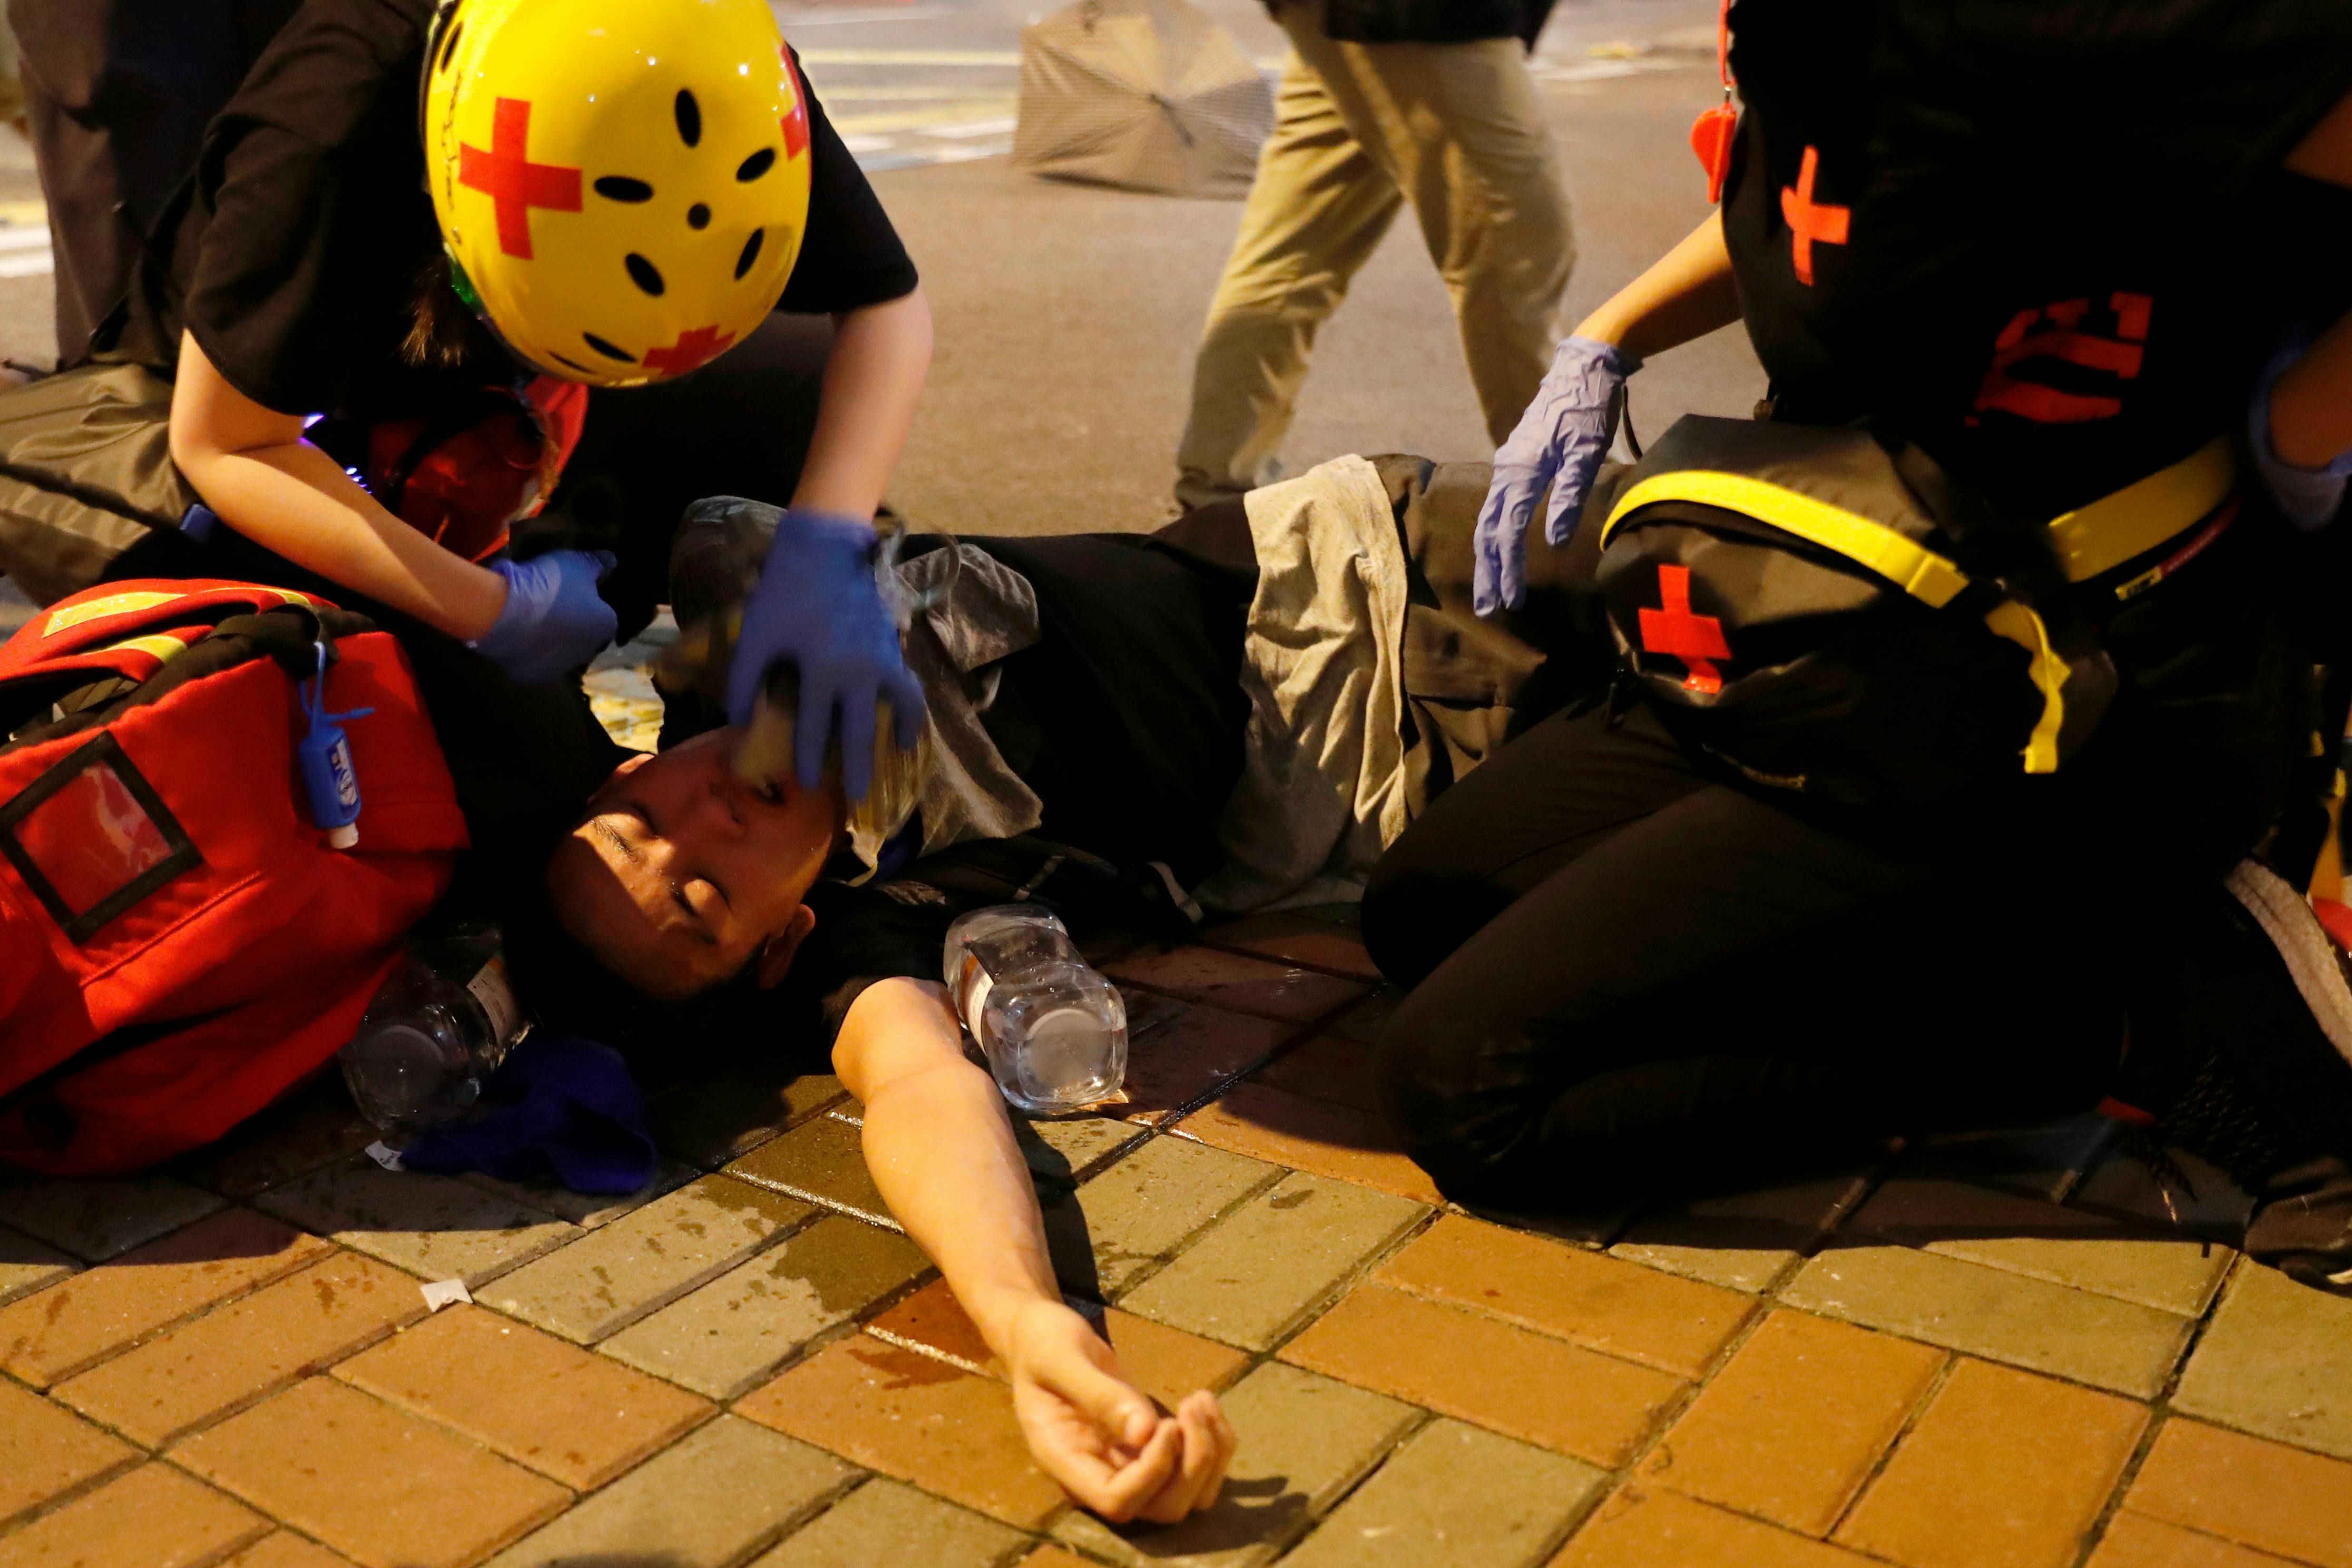 An anti-extradition bill demonstrator receives medical attention after riot police fire tear gas after a march to call for democratic reforms, in Hong Kong